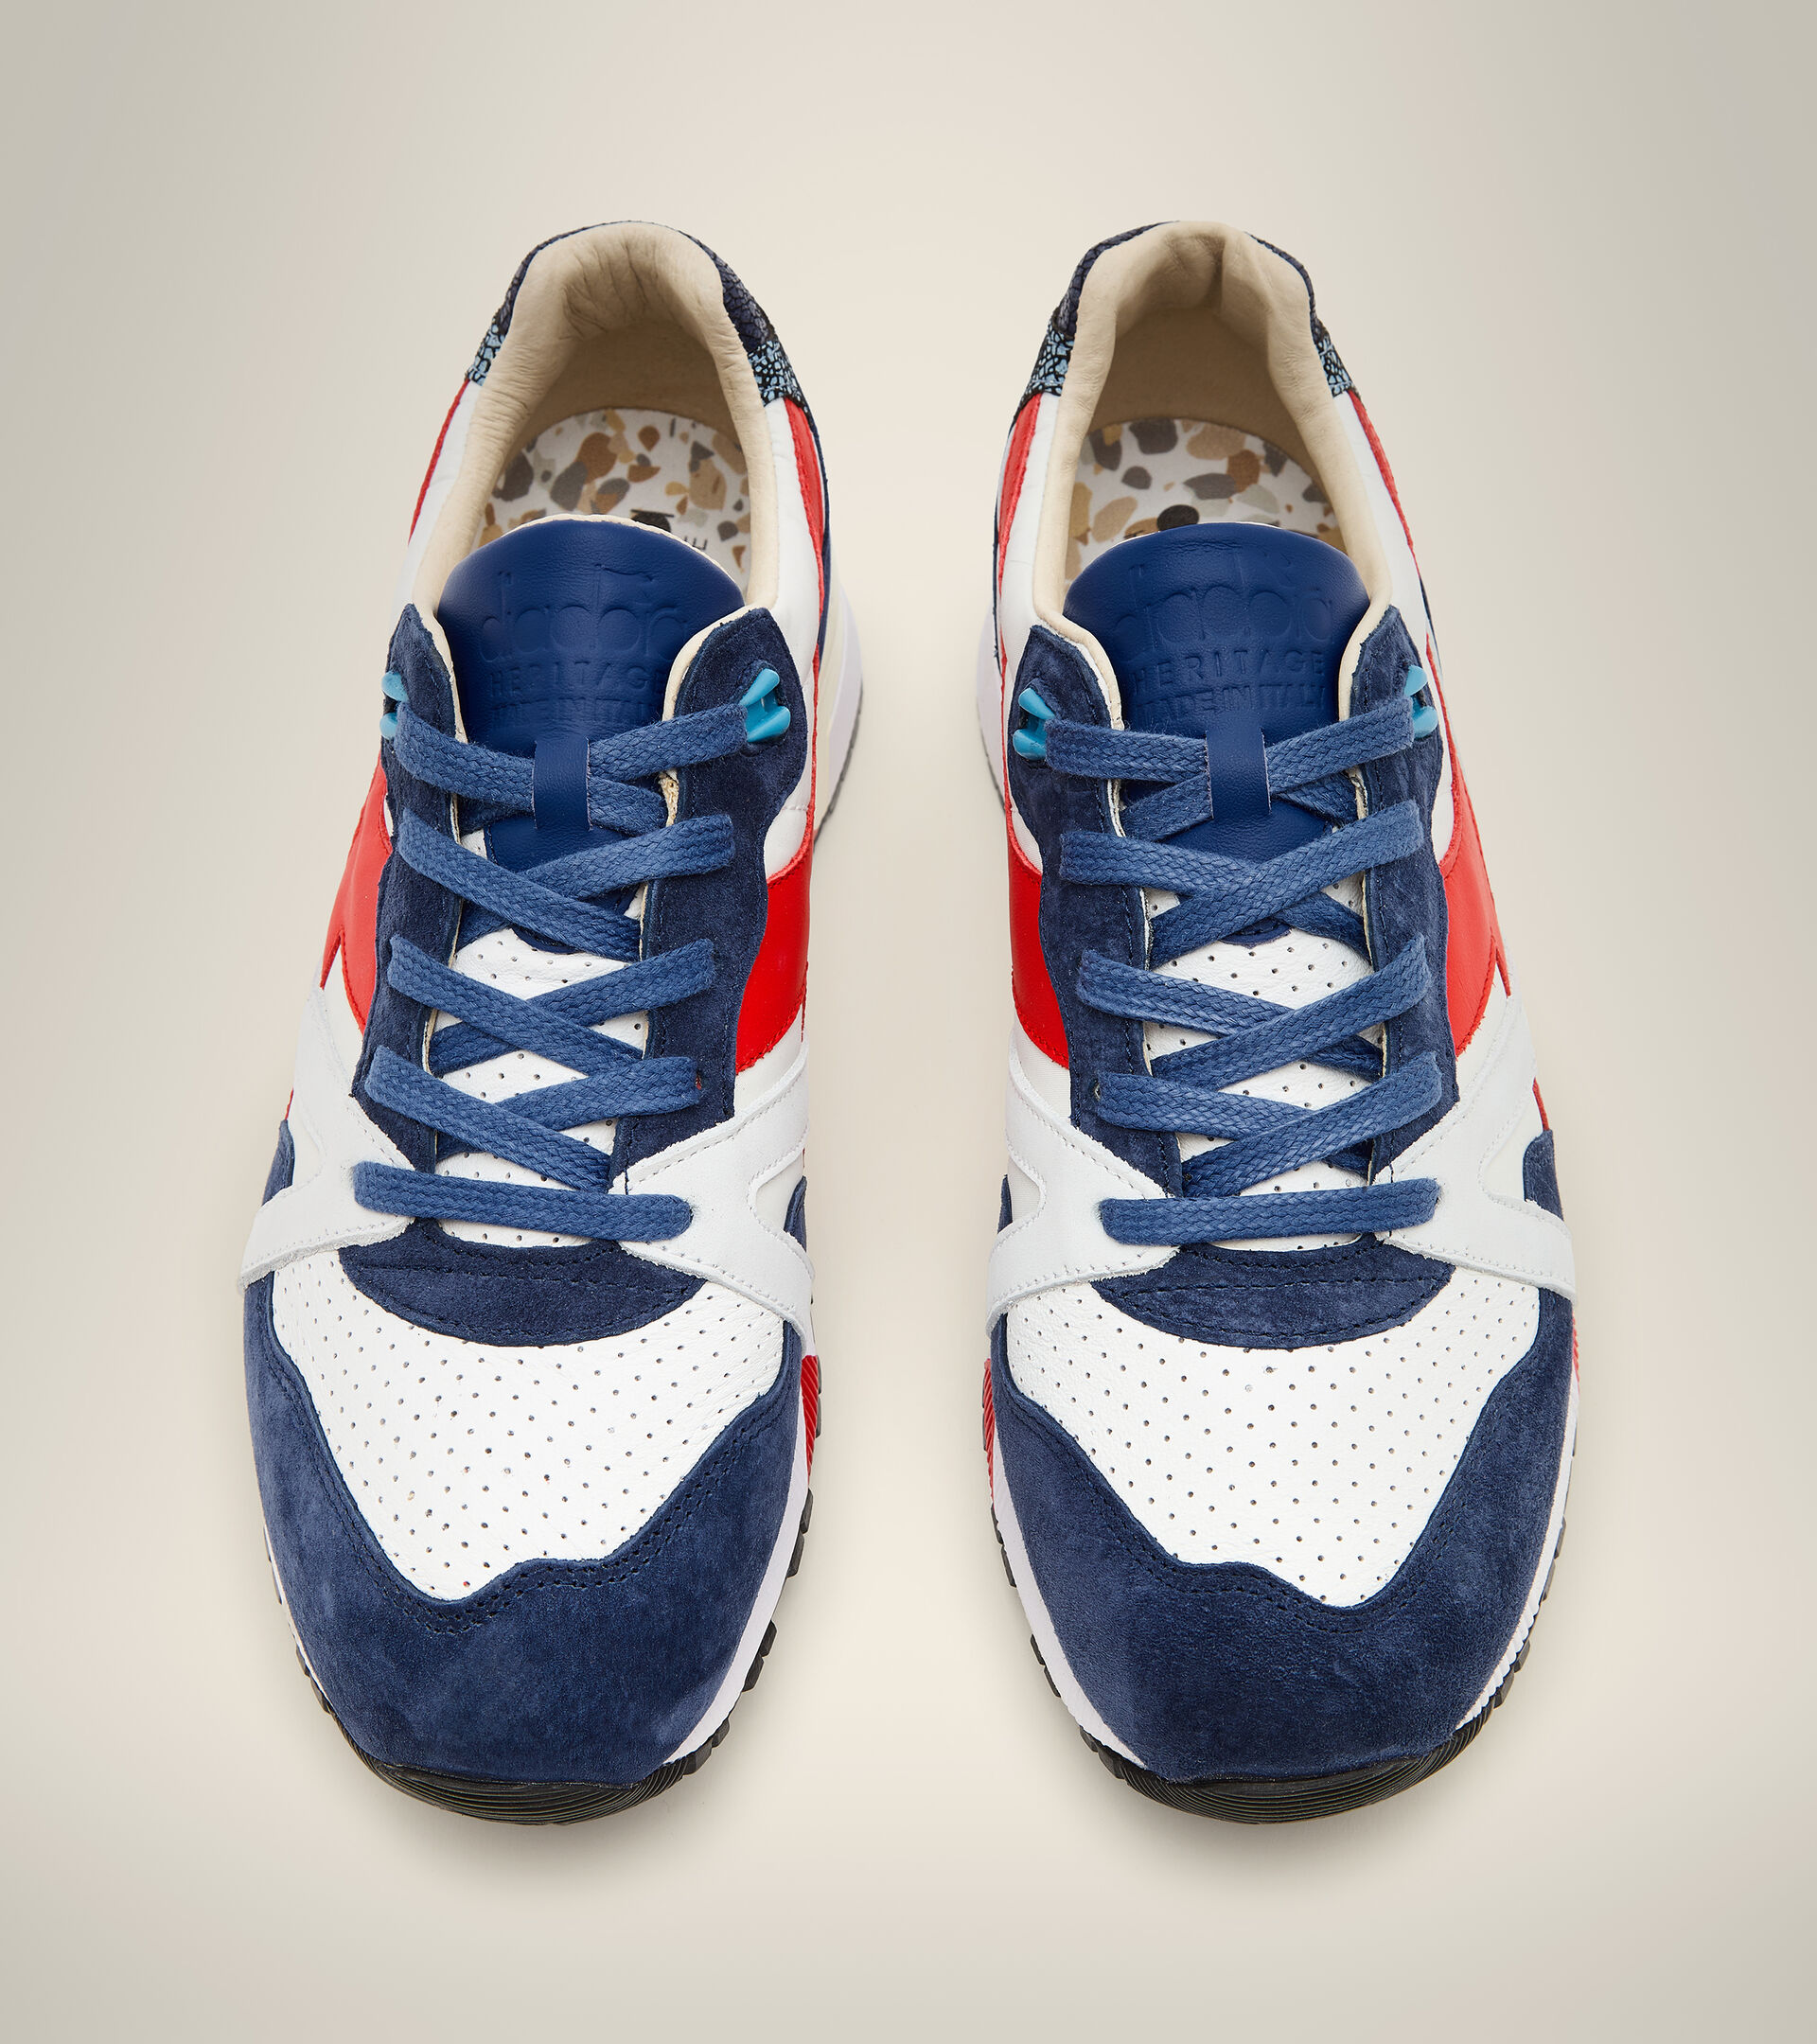 Chaussures Heritage Made in Italy - Homme N9000 ITALIA WEISS/WAHR MARINEBLAU - Diadora